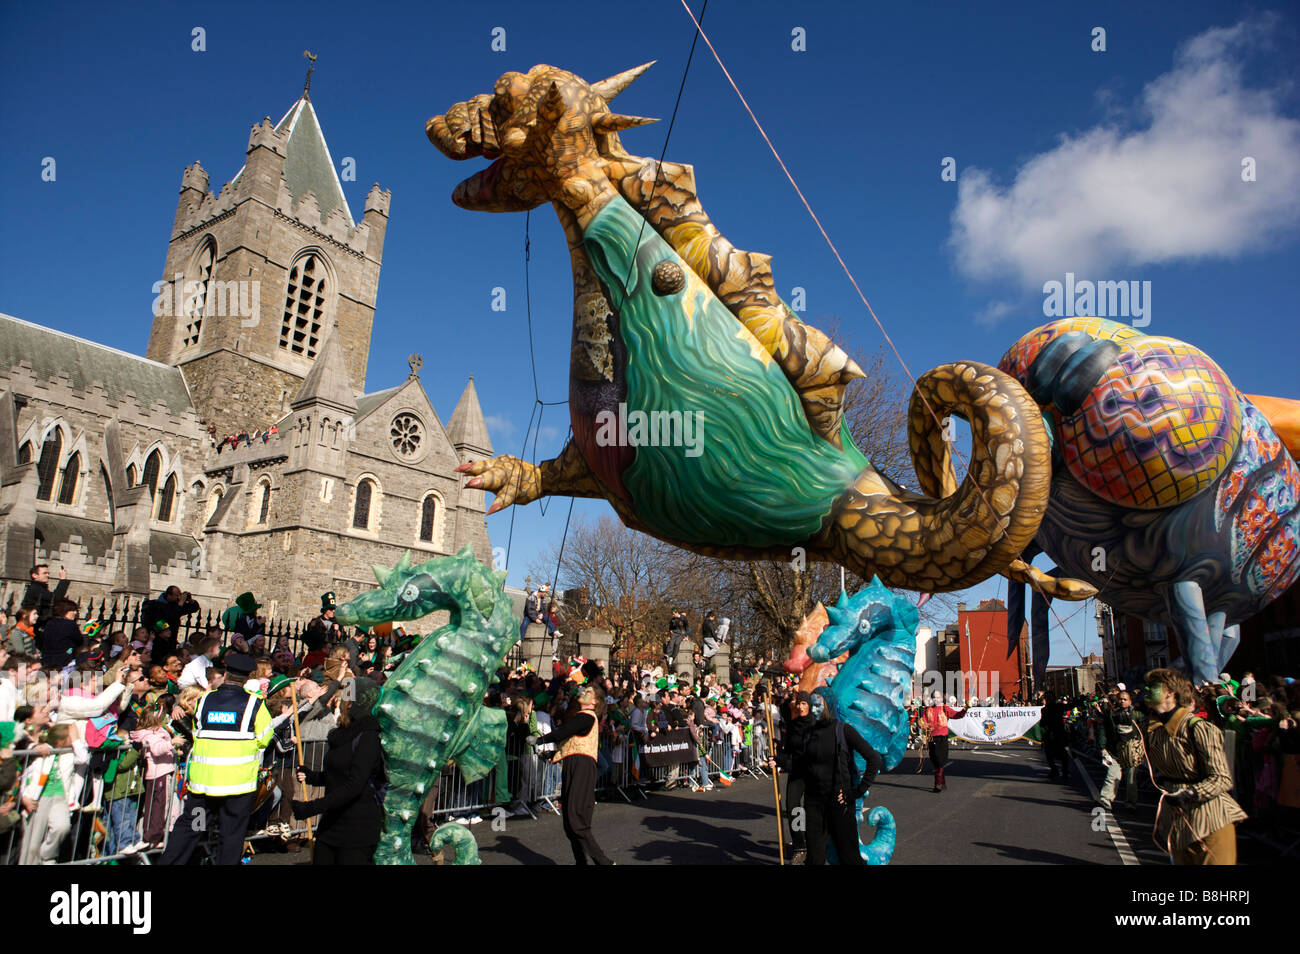 Participants, spectators and characters and parade onlookers in the St Patricks Day parade, Dublin, Ireland Stock Photo